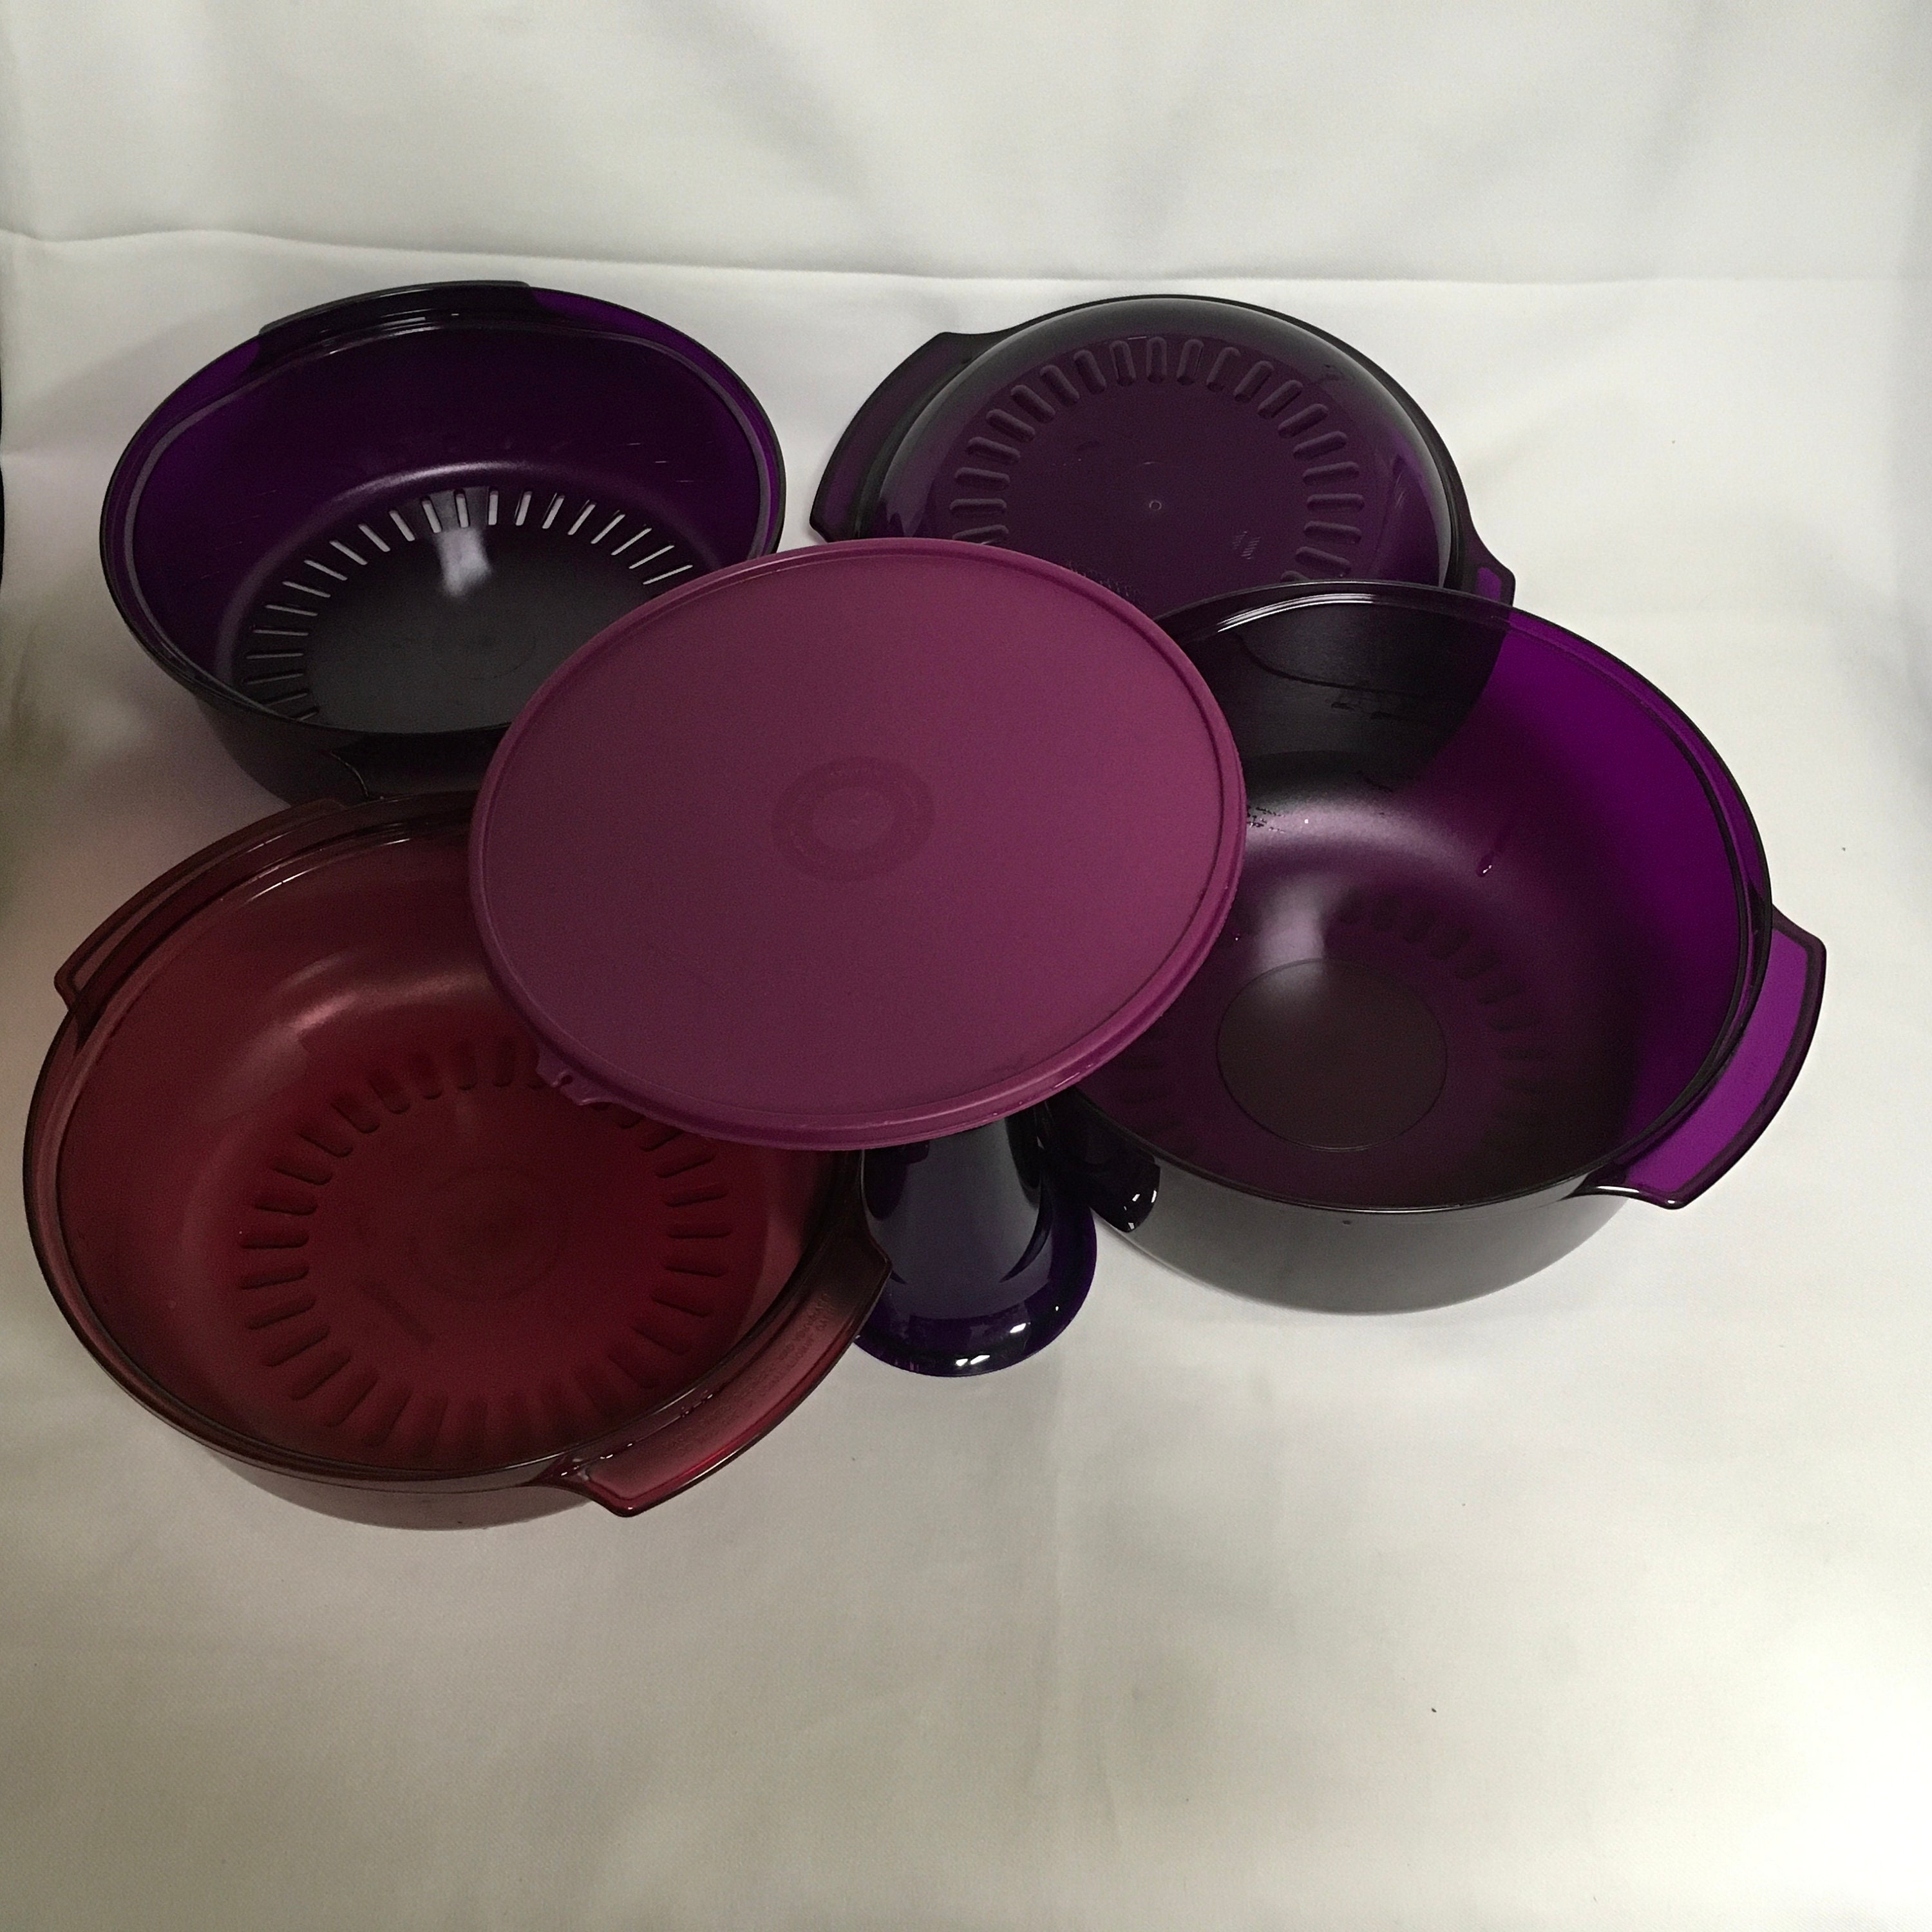 Tupperware Tupperwave Stack Cooker Cookware System Microwave Jewel